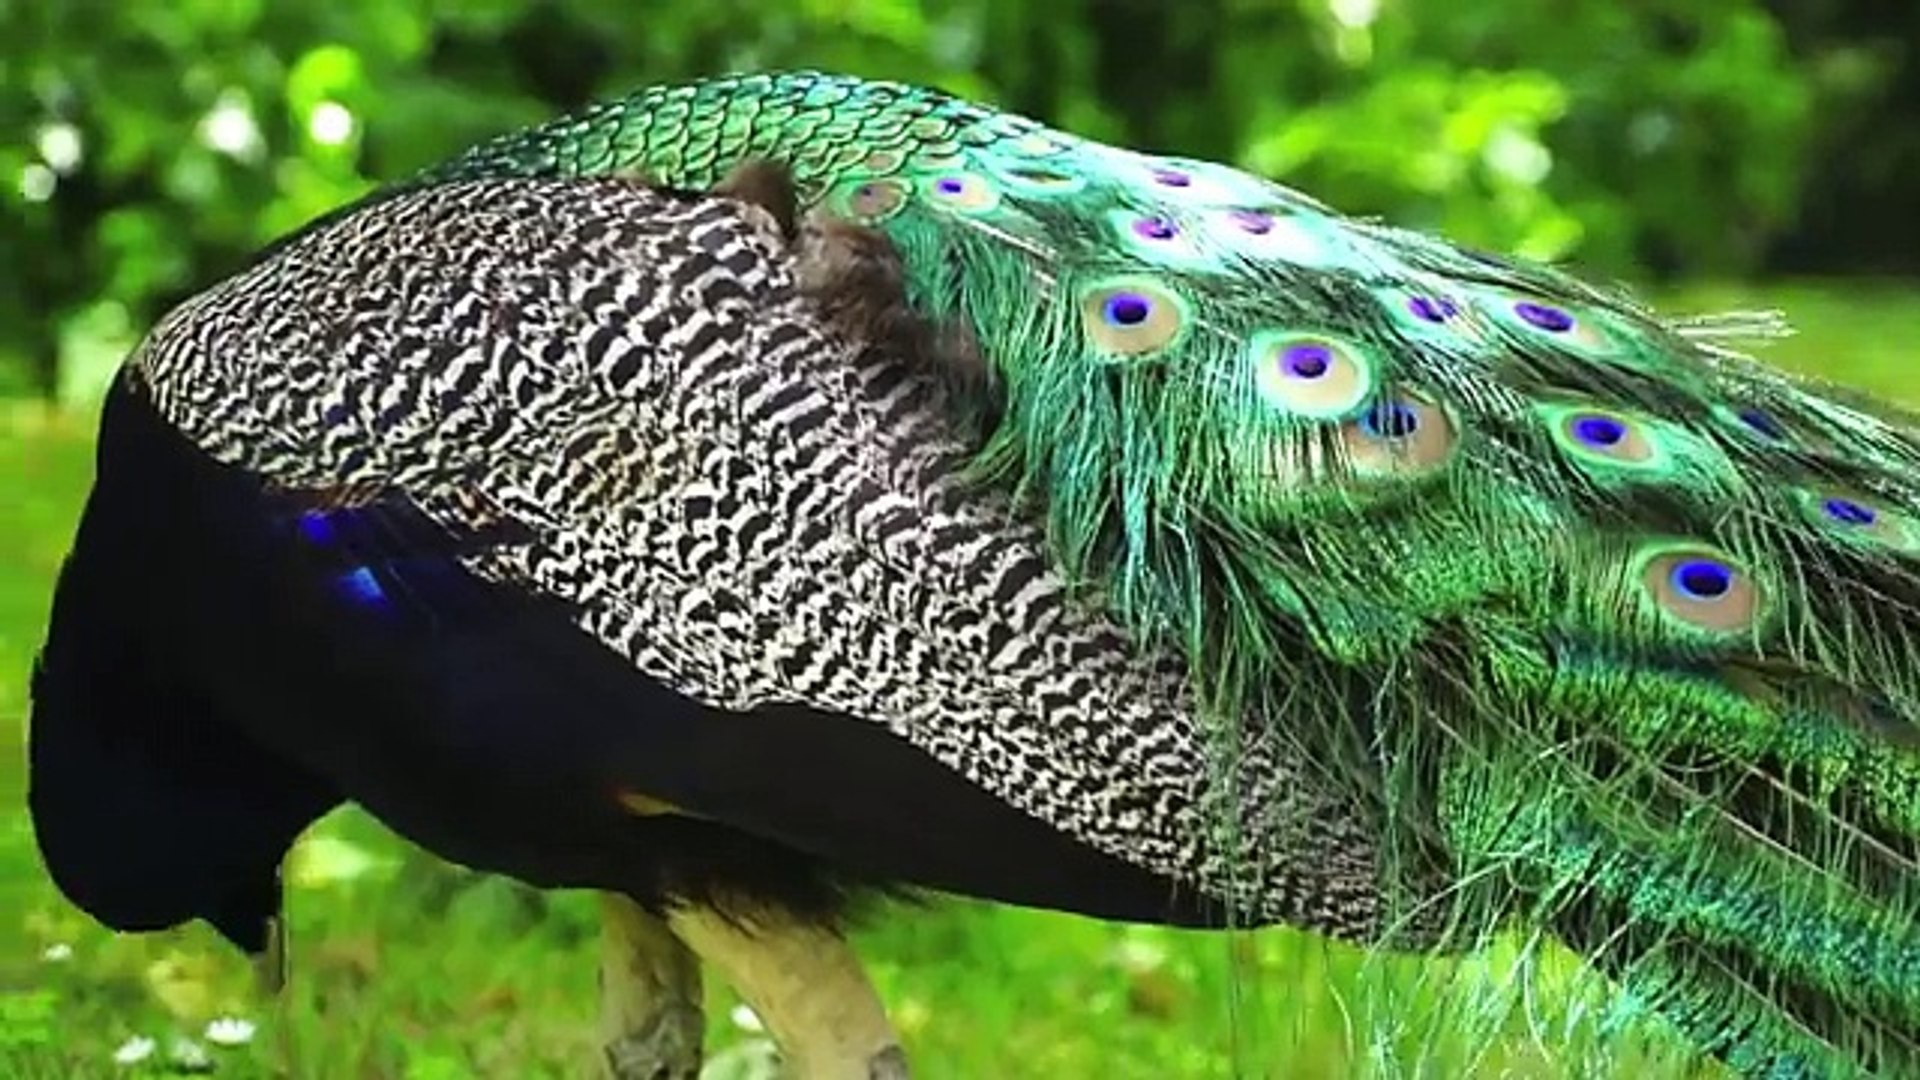 Peacock one of the most beautiful birds top songs 2016 best songs new songs upcoming songs latest so